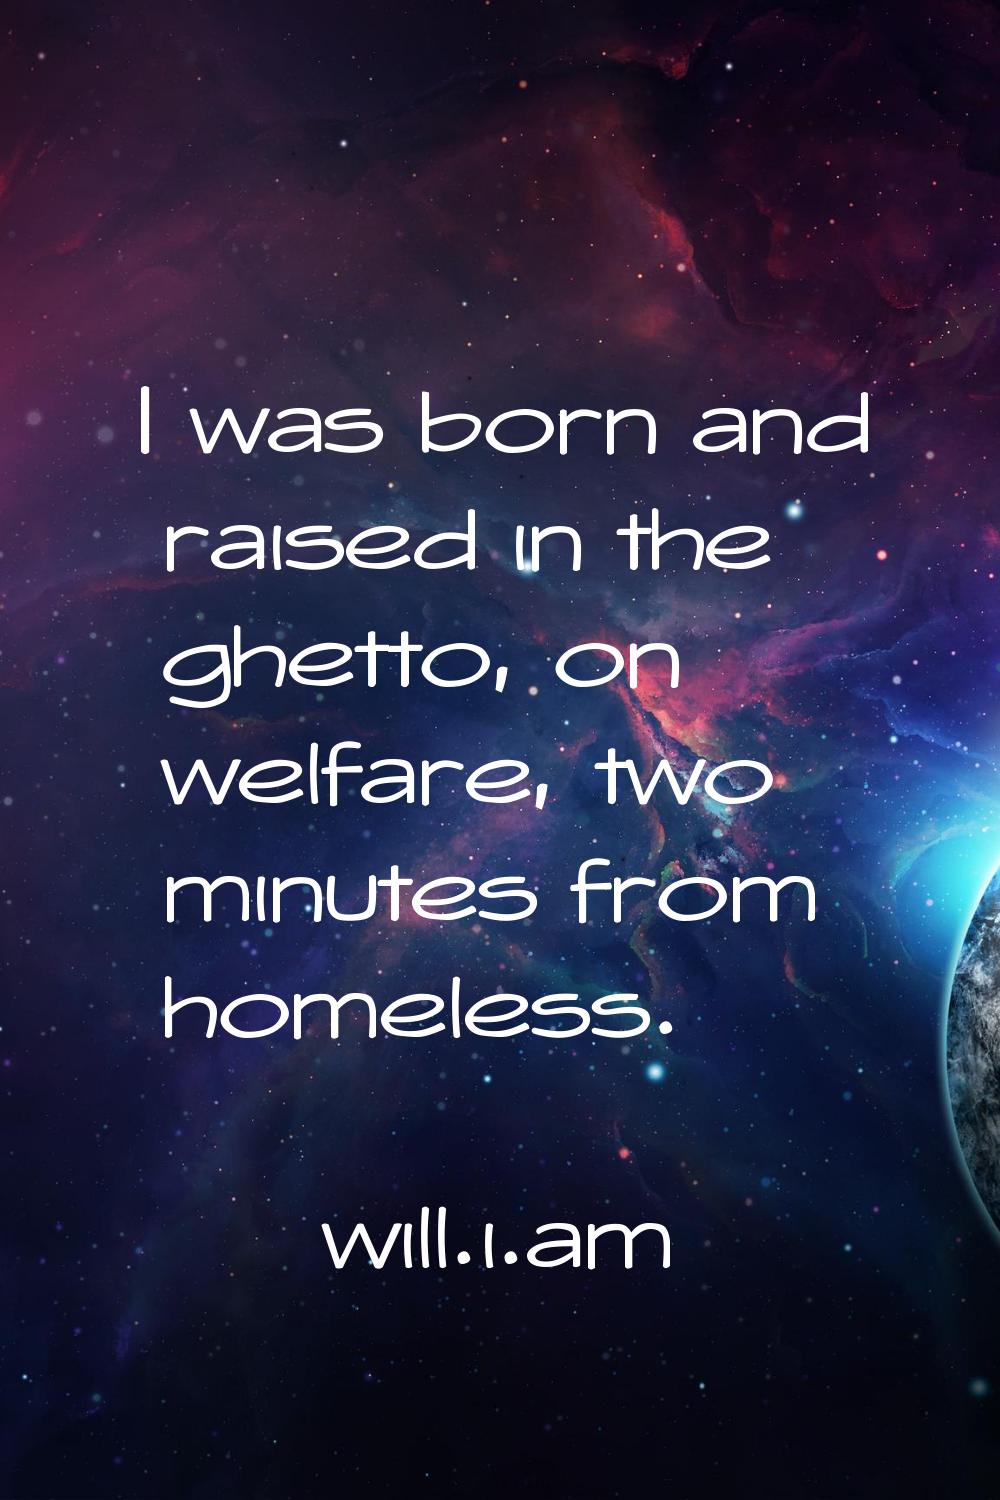 I was born and raised in the ghetto, on welfare, two minutes from homeless.